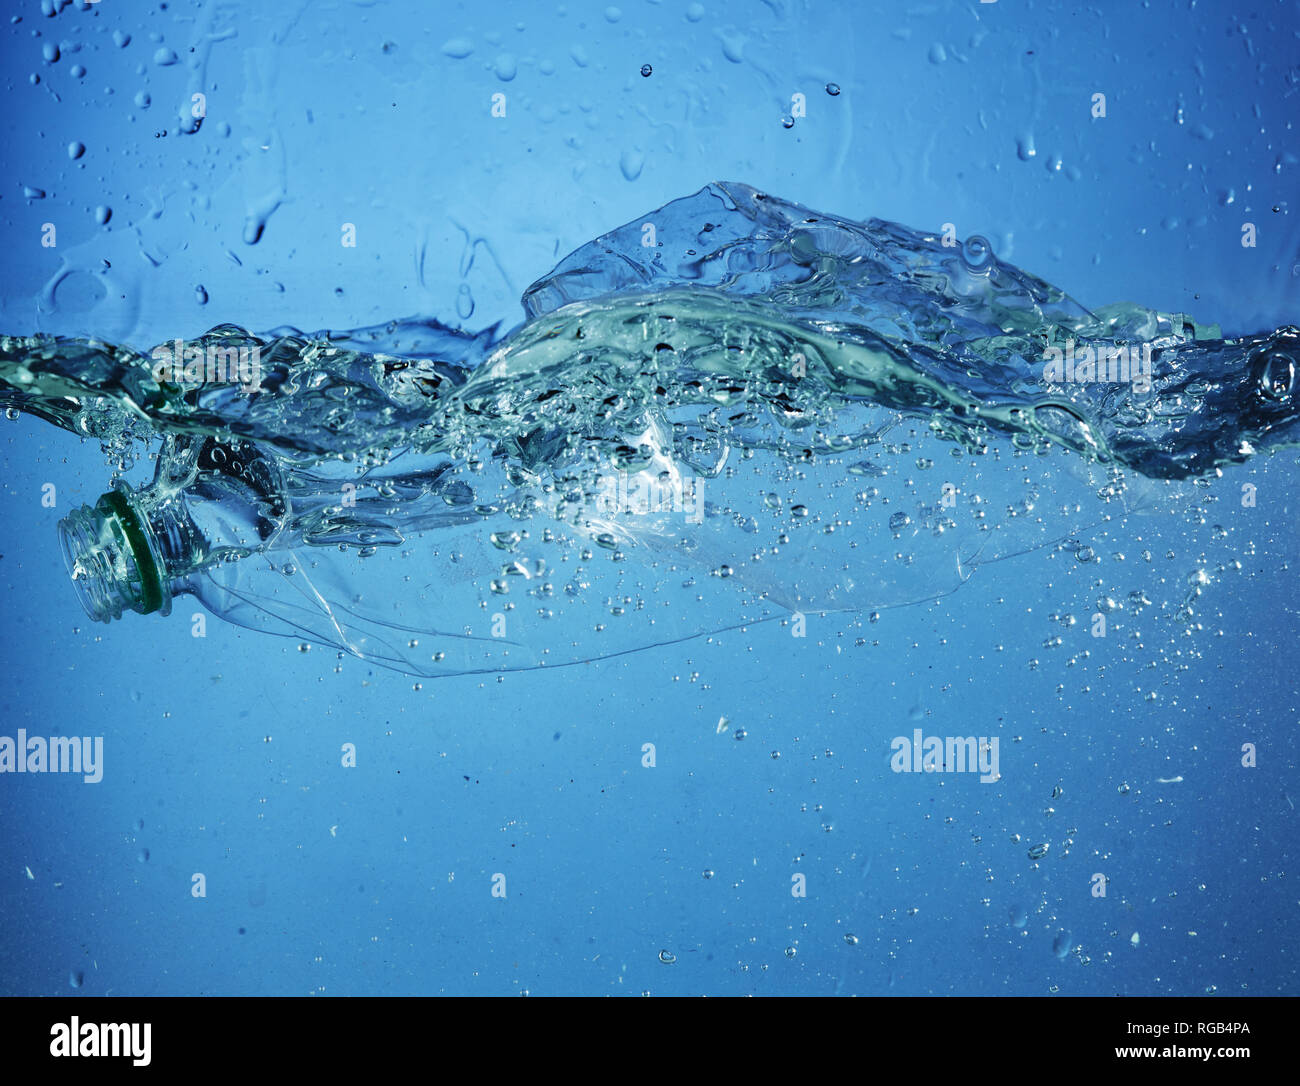 Plastic water bottle pollution in ocean Environment concept Stock Photo